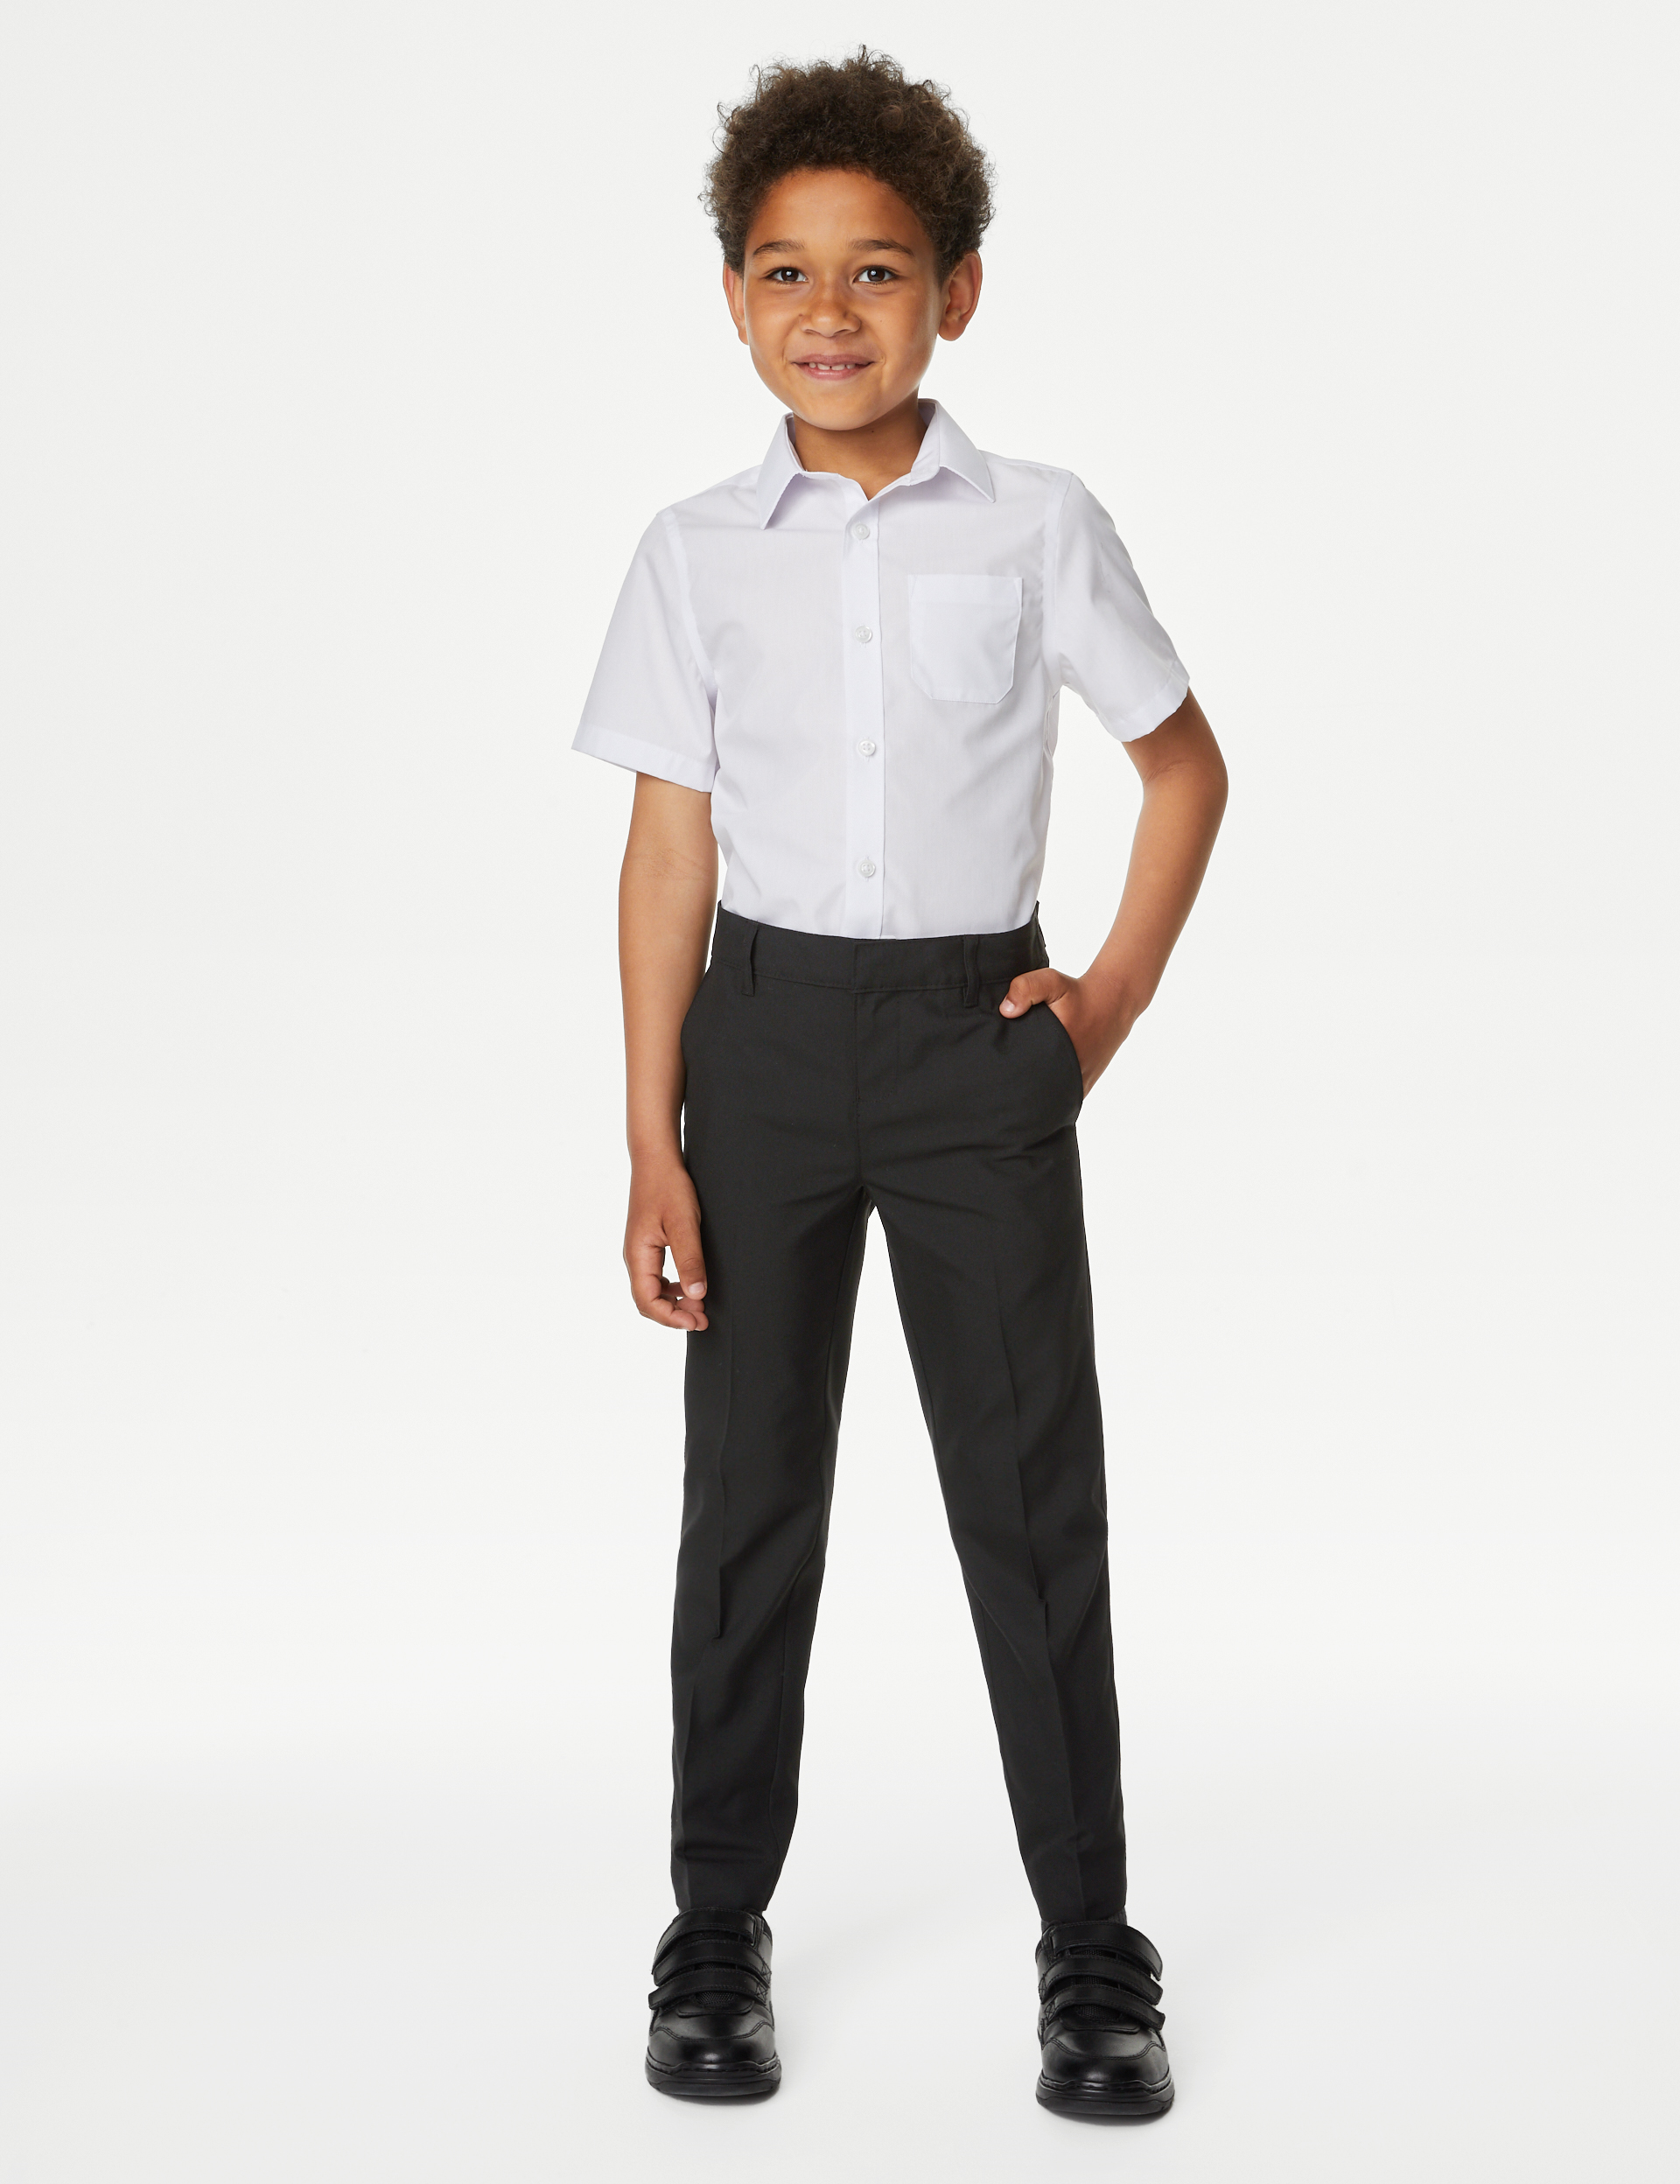 Buy Black Plain Front School Trousers (3-18yrs) from the Next UK online shop